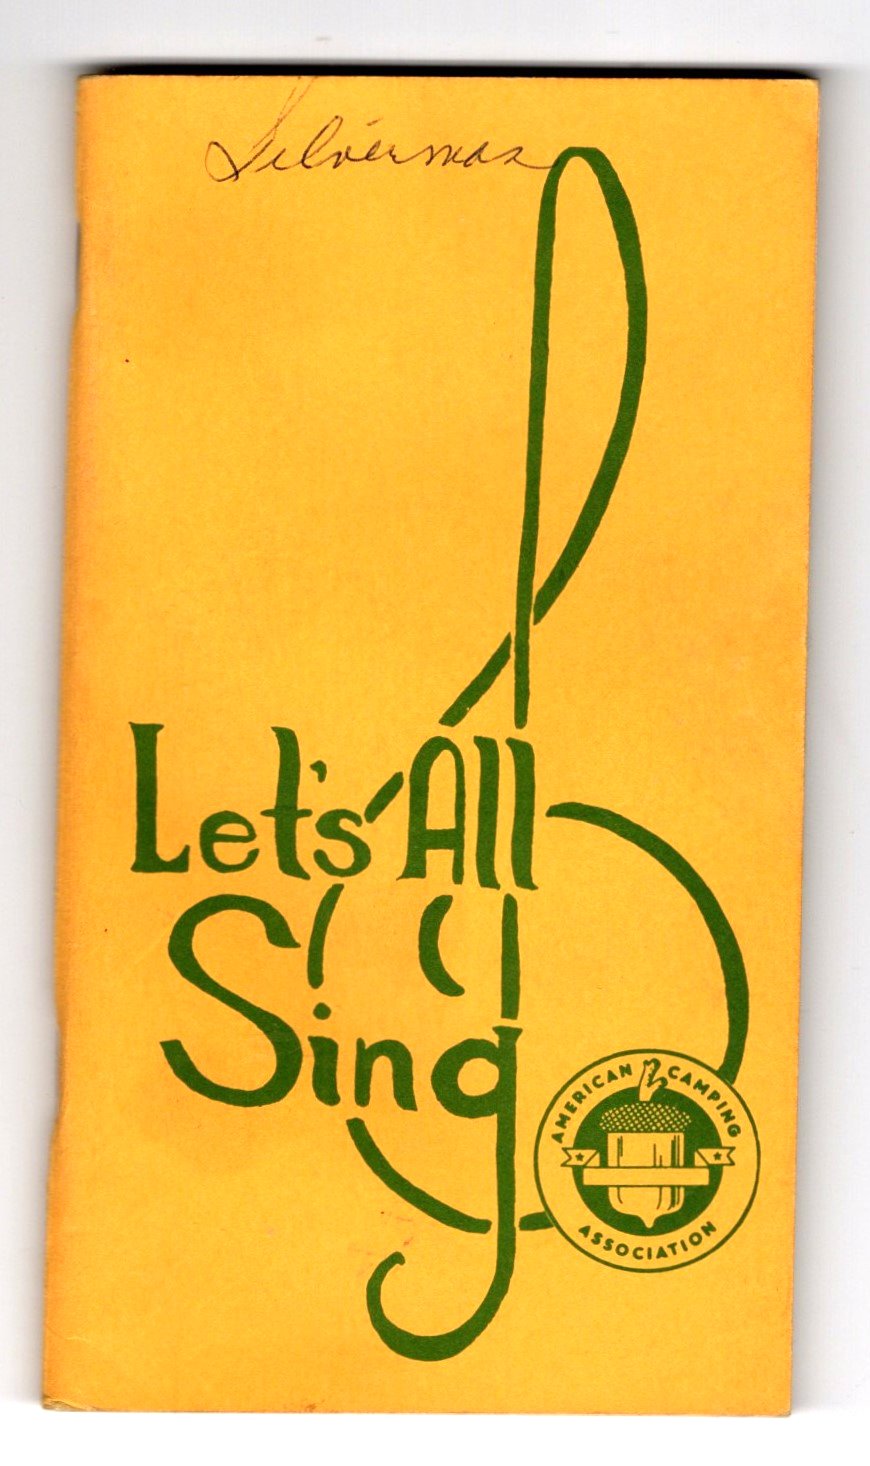 Image for Let's all Sing :  American Camping Association